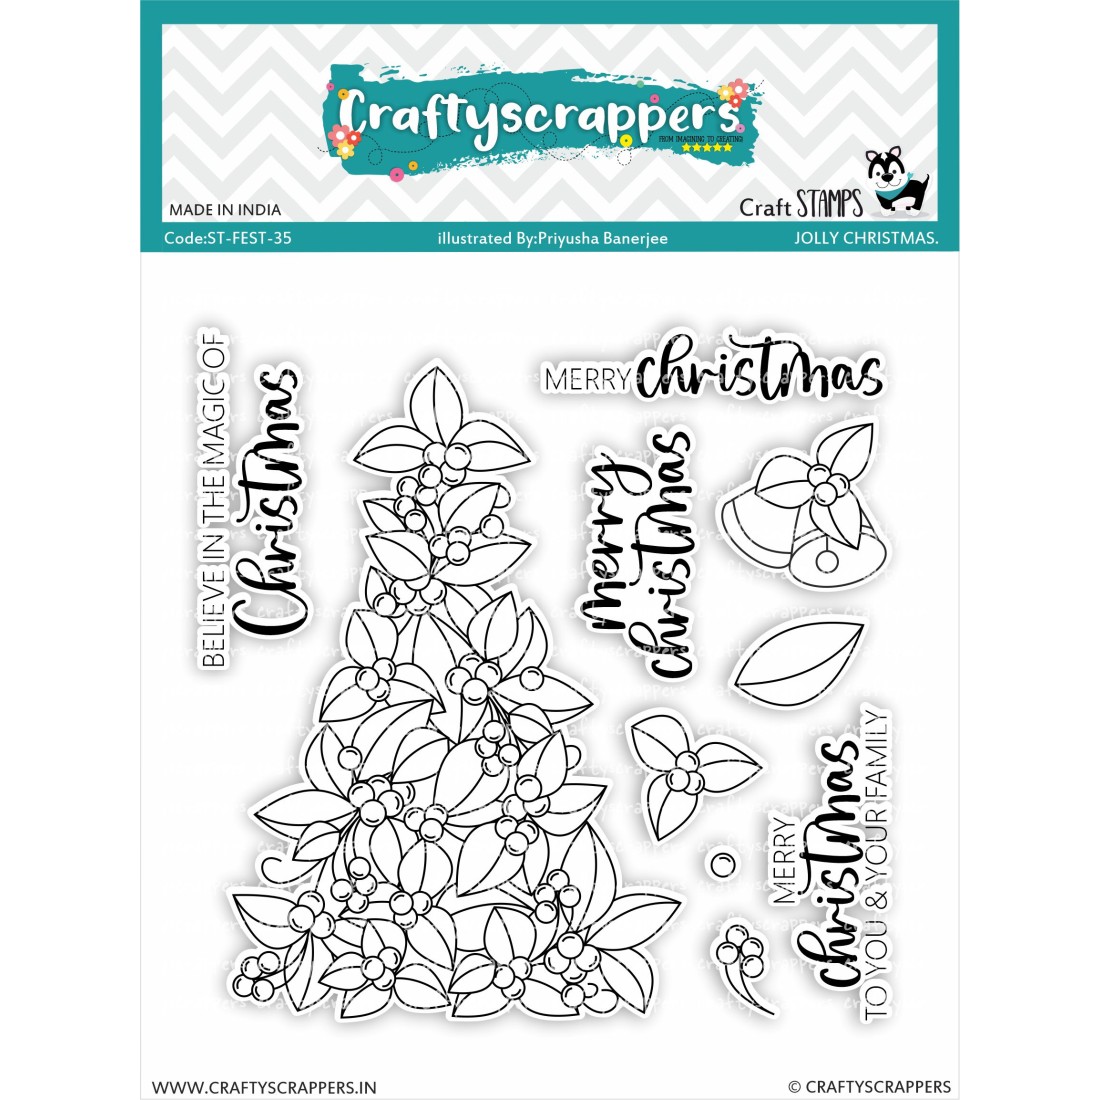 Craftyscrappers Stamps- JOLLY CHRISTMAS